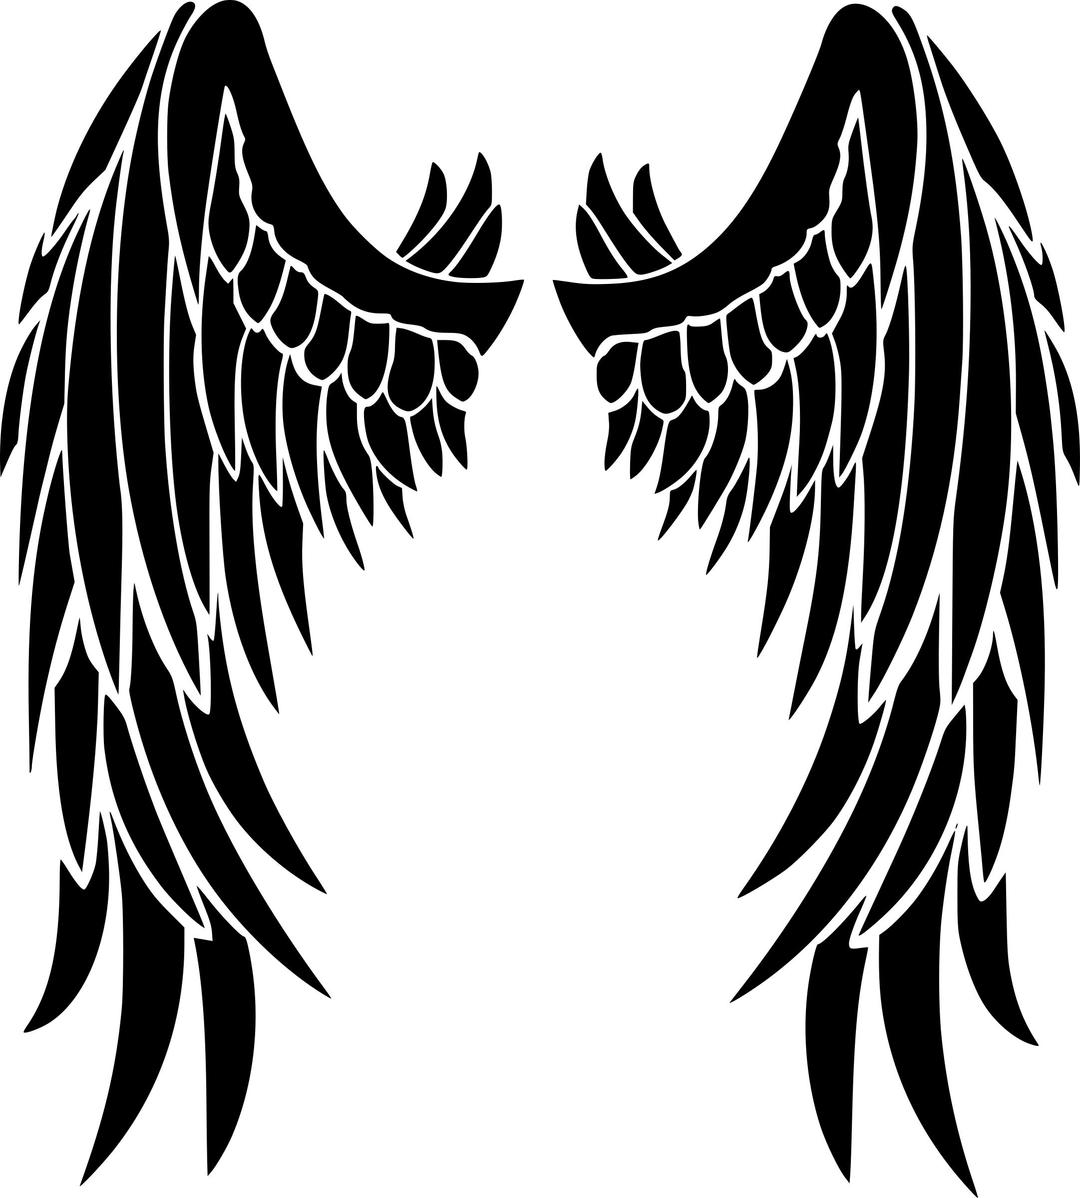 Angel wings png transparent